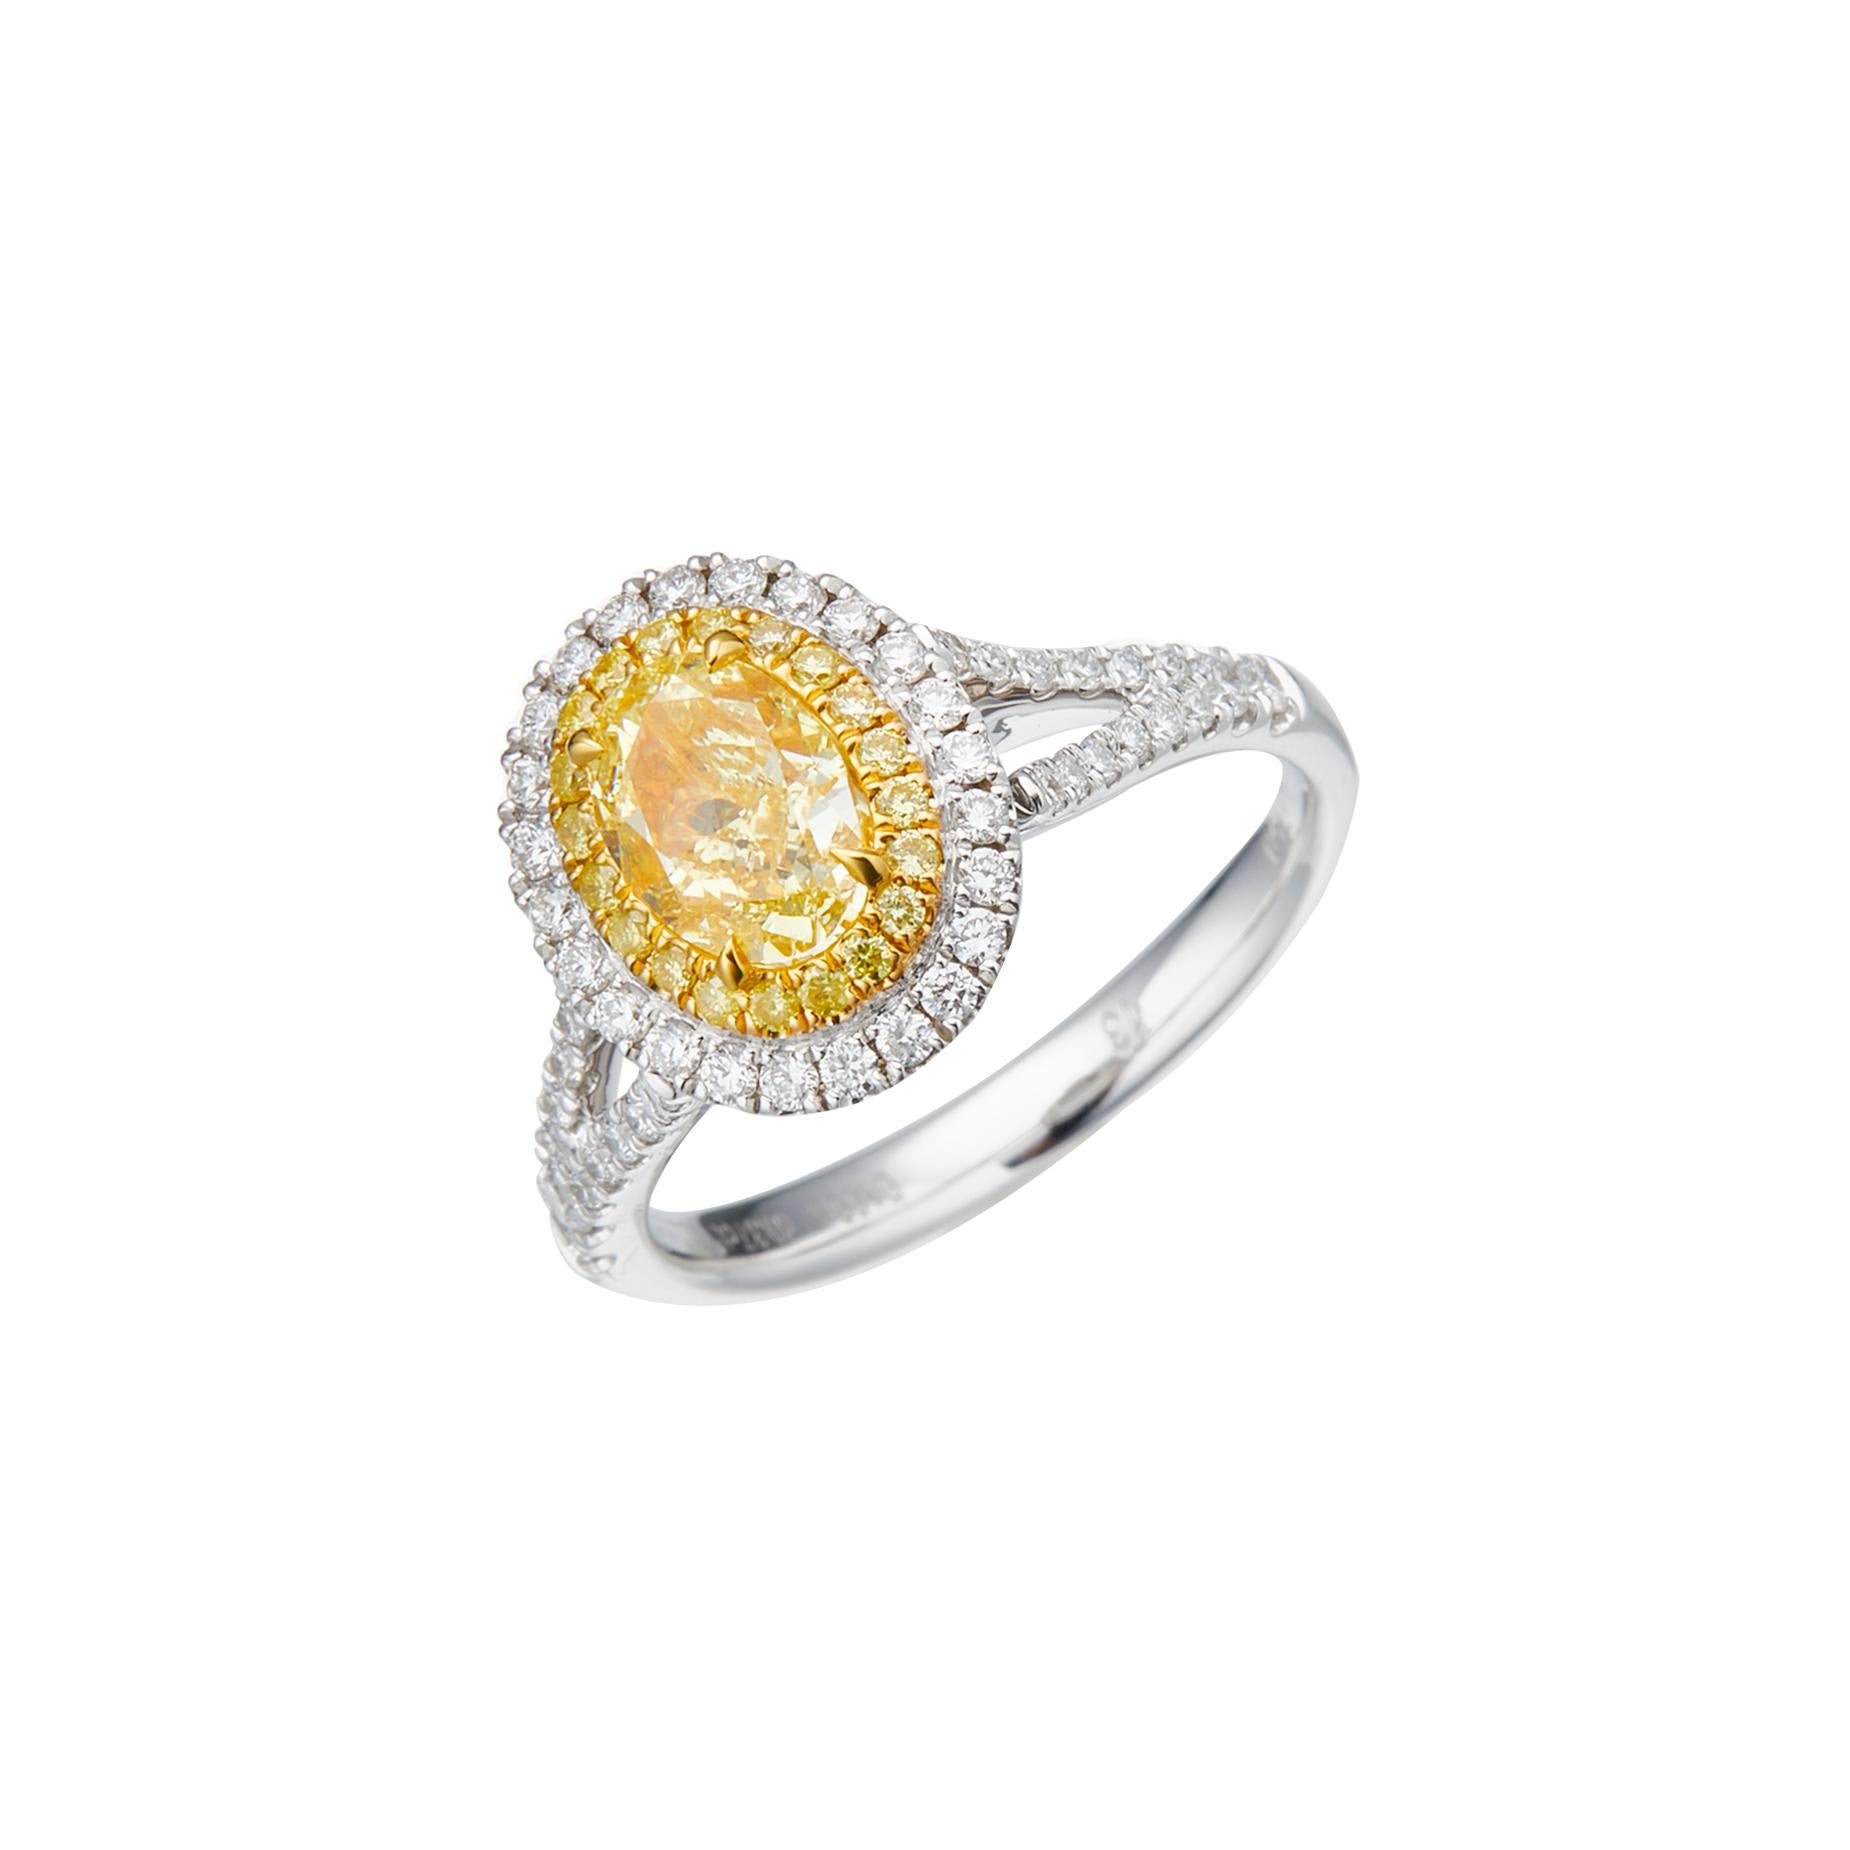 Discover the epitome of elegance and versatility with this breathtaking GIA Certified 1.00 carat Natural Fancy Yellow Cushion Cut Diamond Solitaire Ring, expertly crafted in luxurious 18kt gold. This exquisite piece is not only a statement of